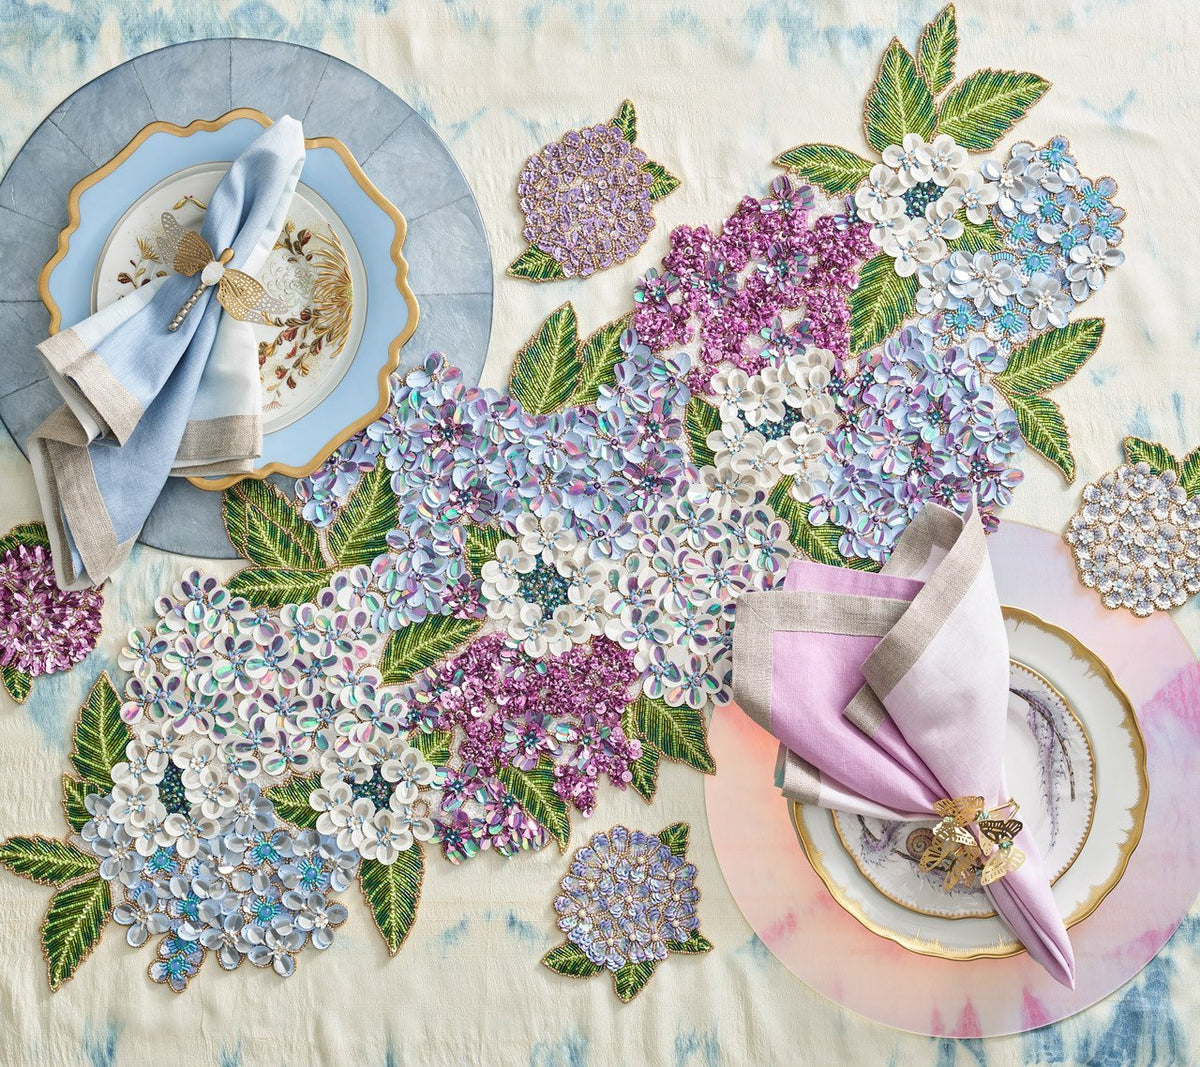 Hydrangea Table Runner in hues of blue, white and purple on a table with similar colored placemats & napkins